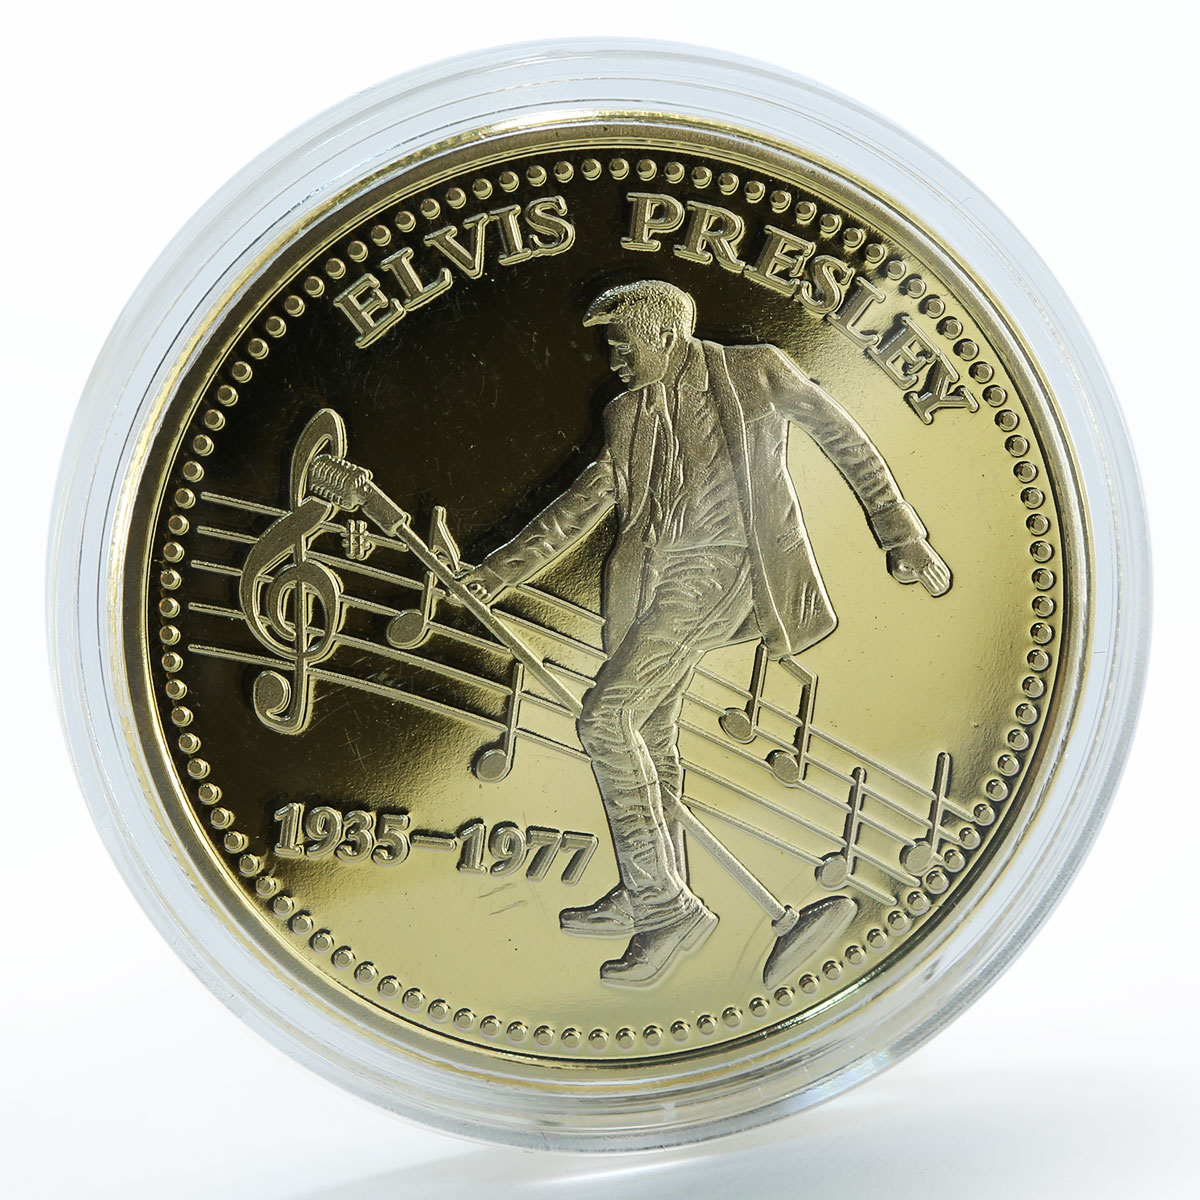 Elvis Presley, The King Of Rock 'n' Roll, Gold Plated Coin, Singer, Token